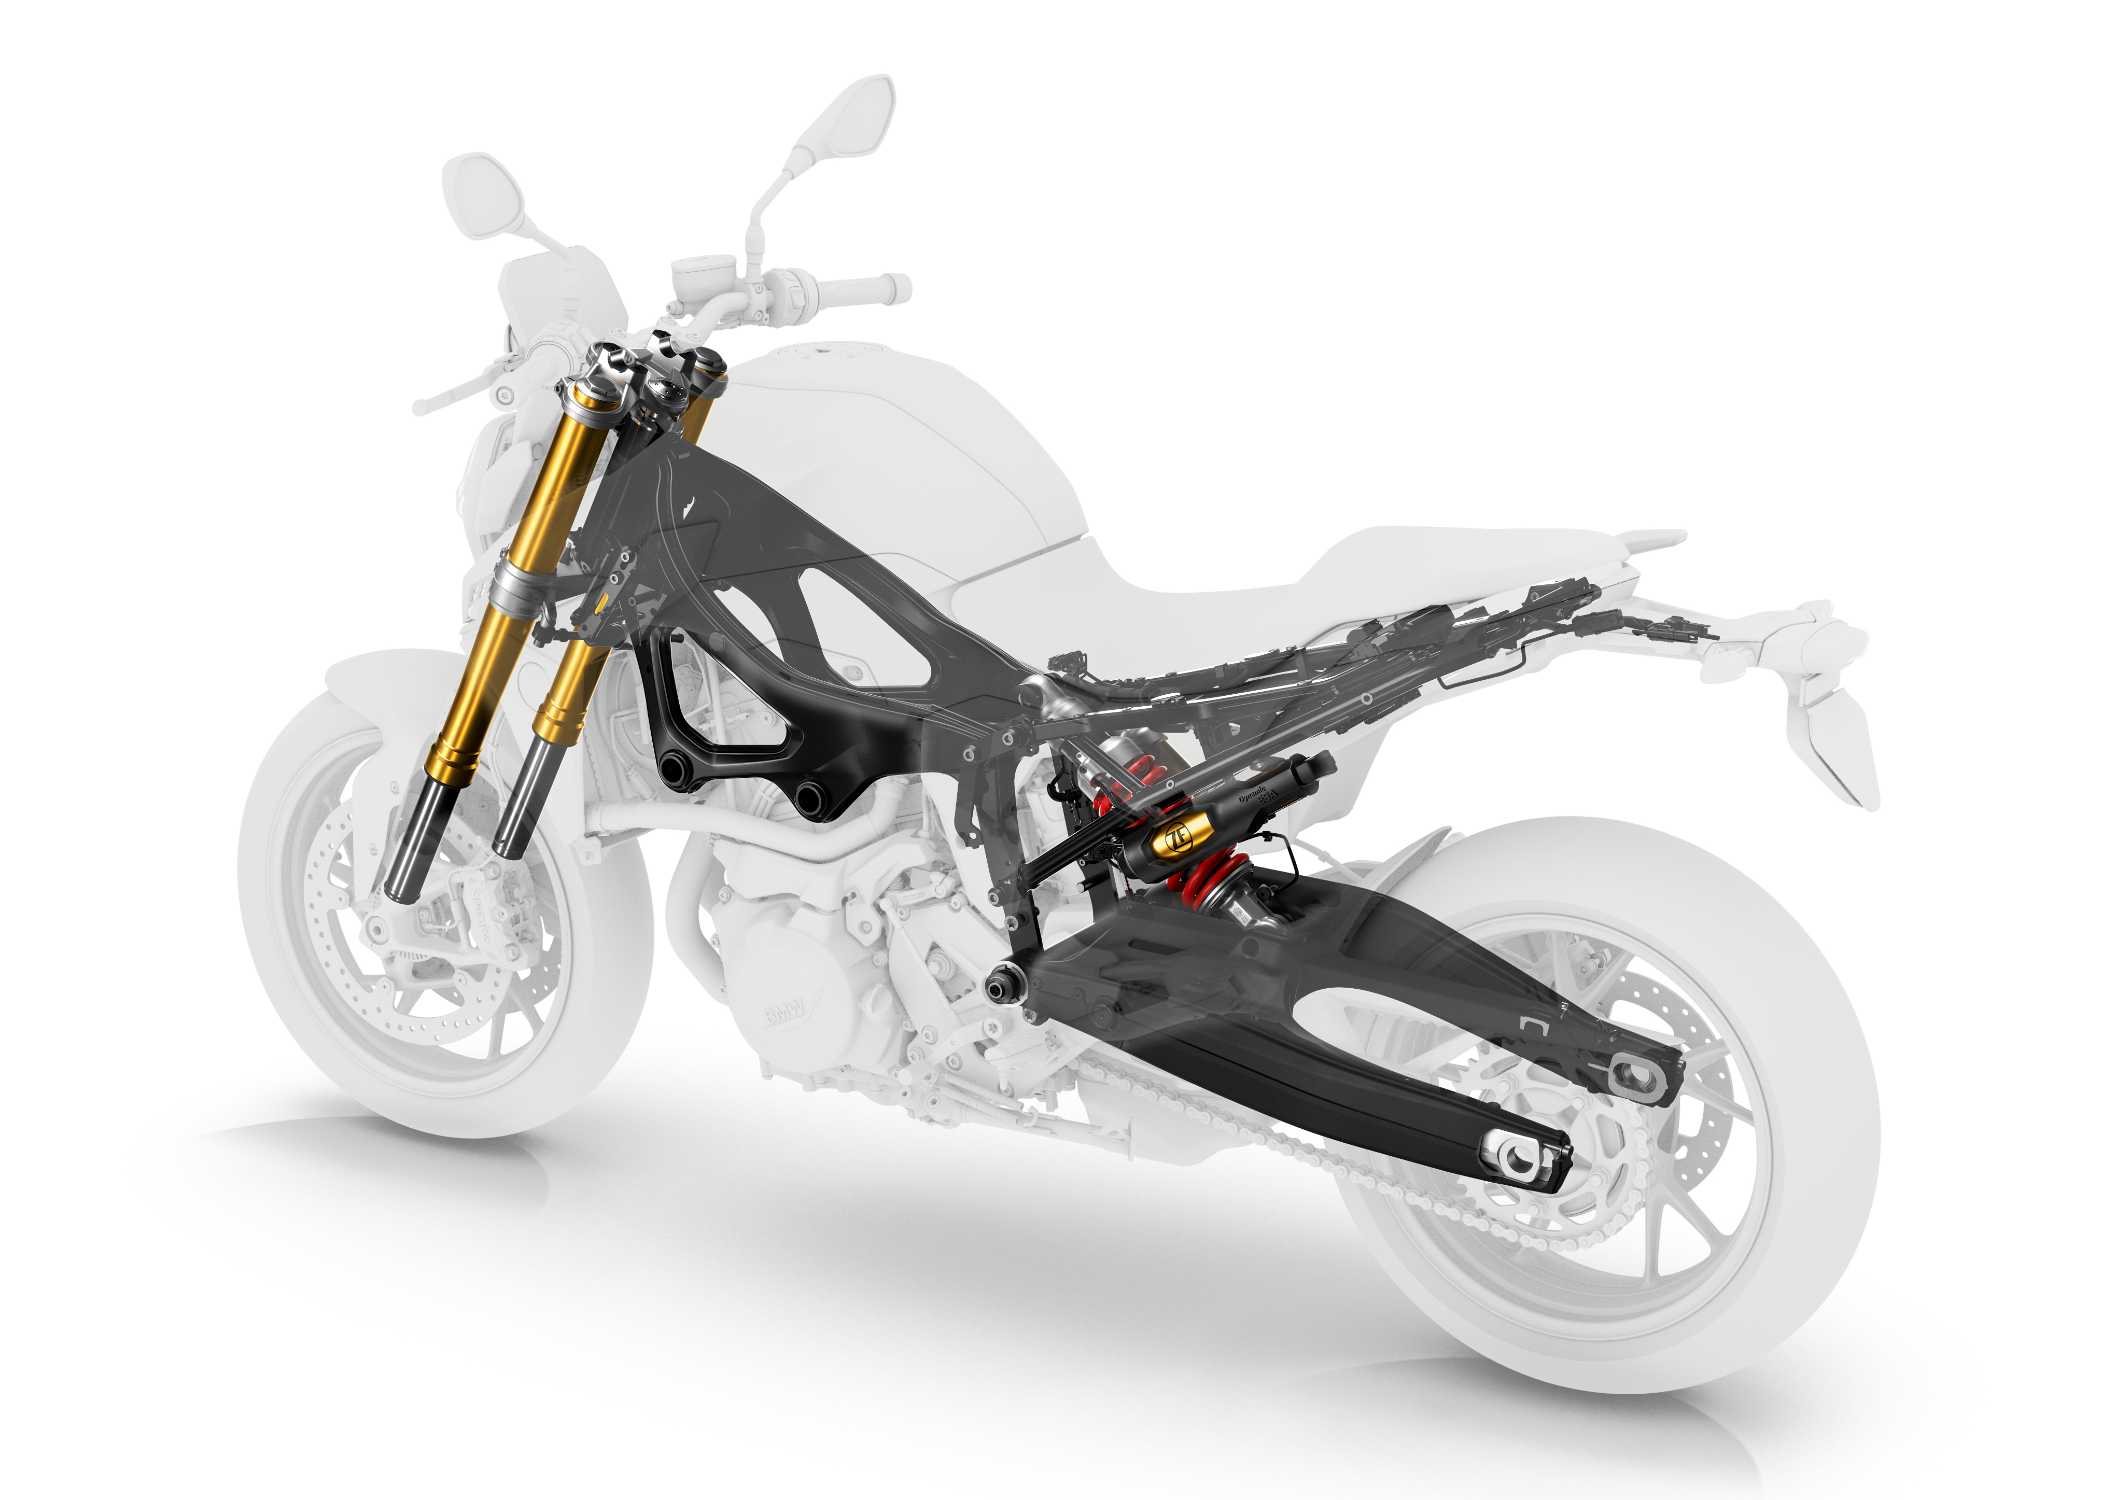 BMW F 900 R / F 900 XR, frame and chassis. (11/2019)